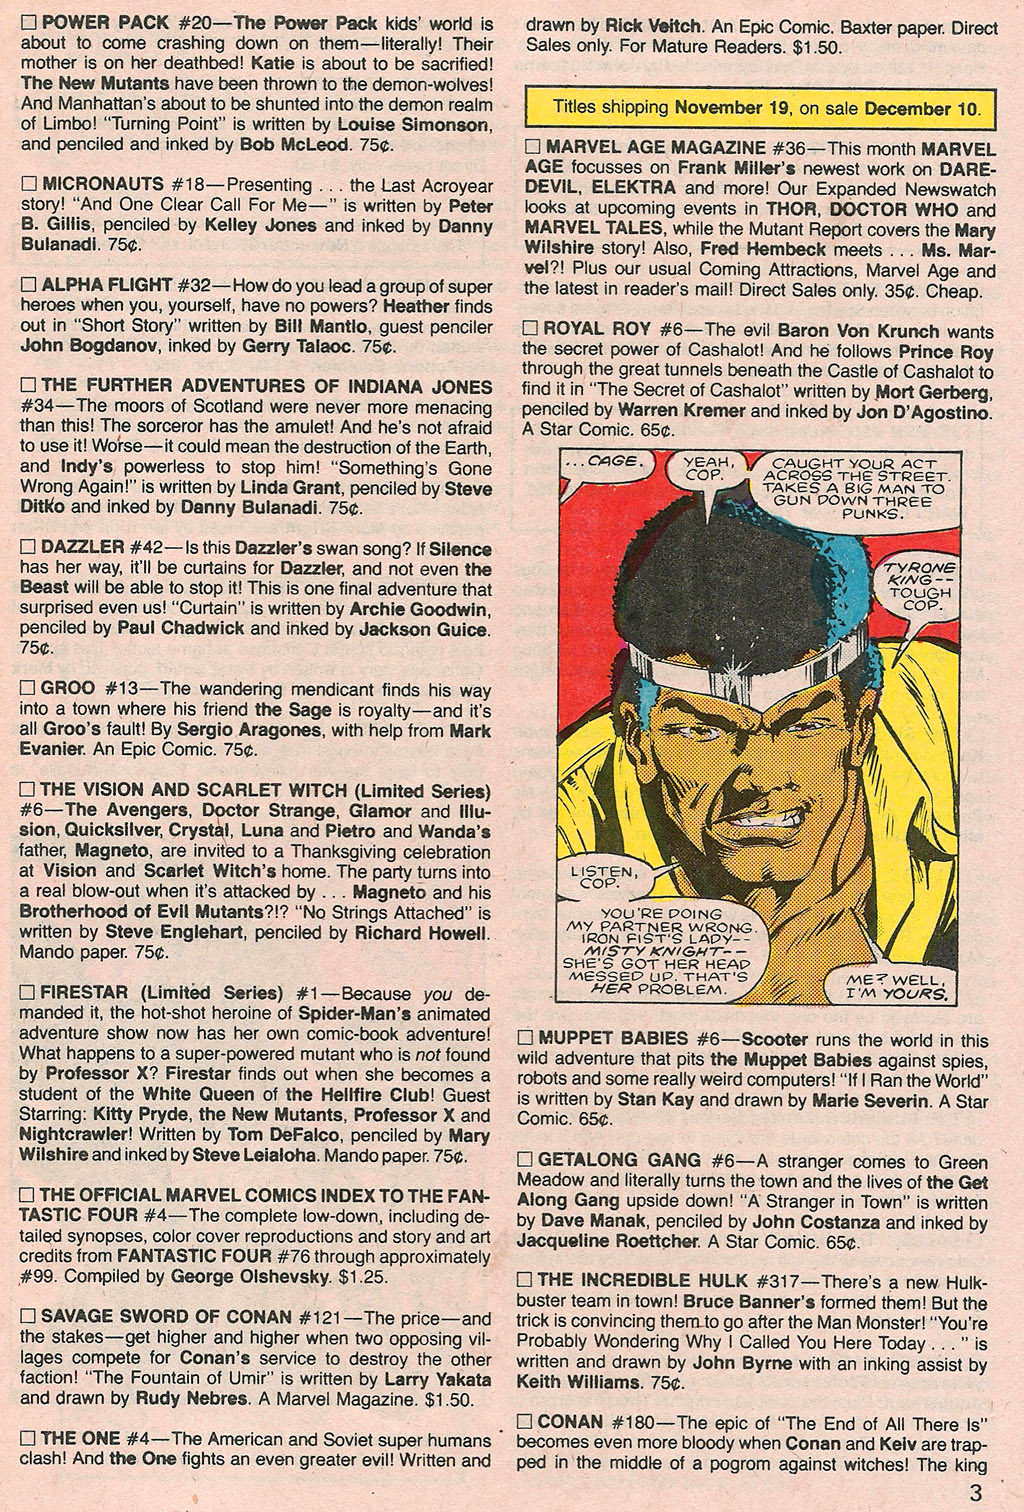 Read online Marvel Age comic -  Issue #35 - 5